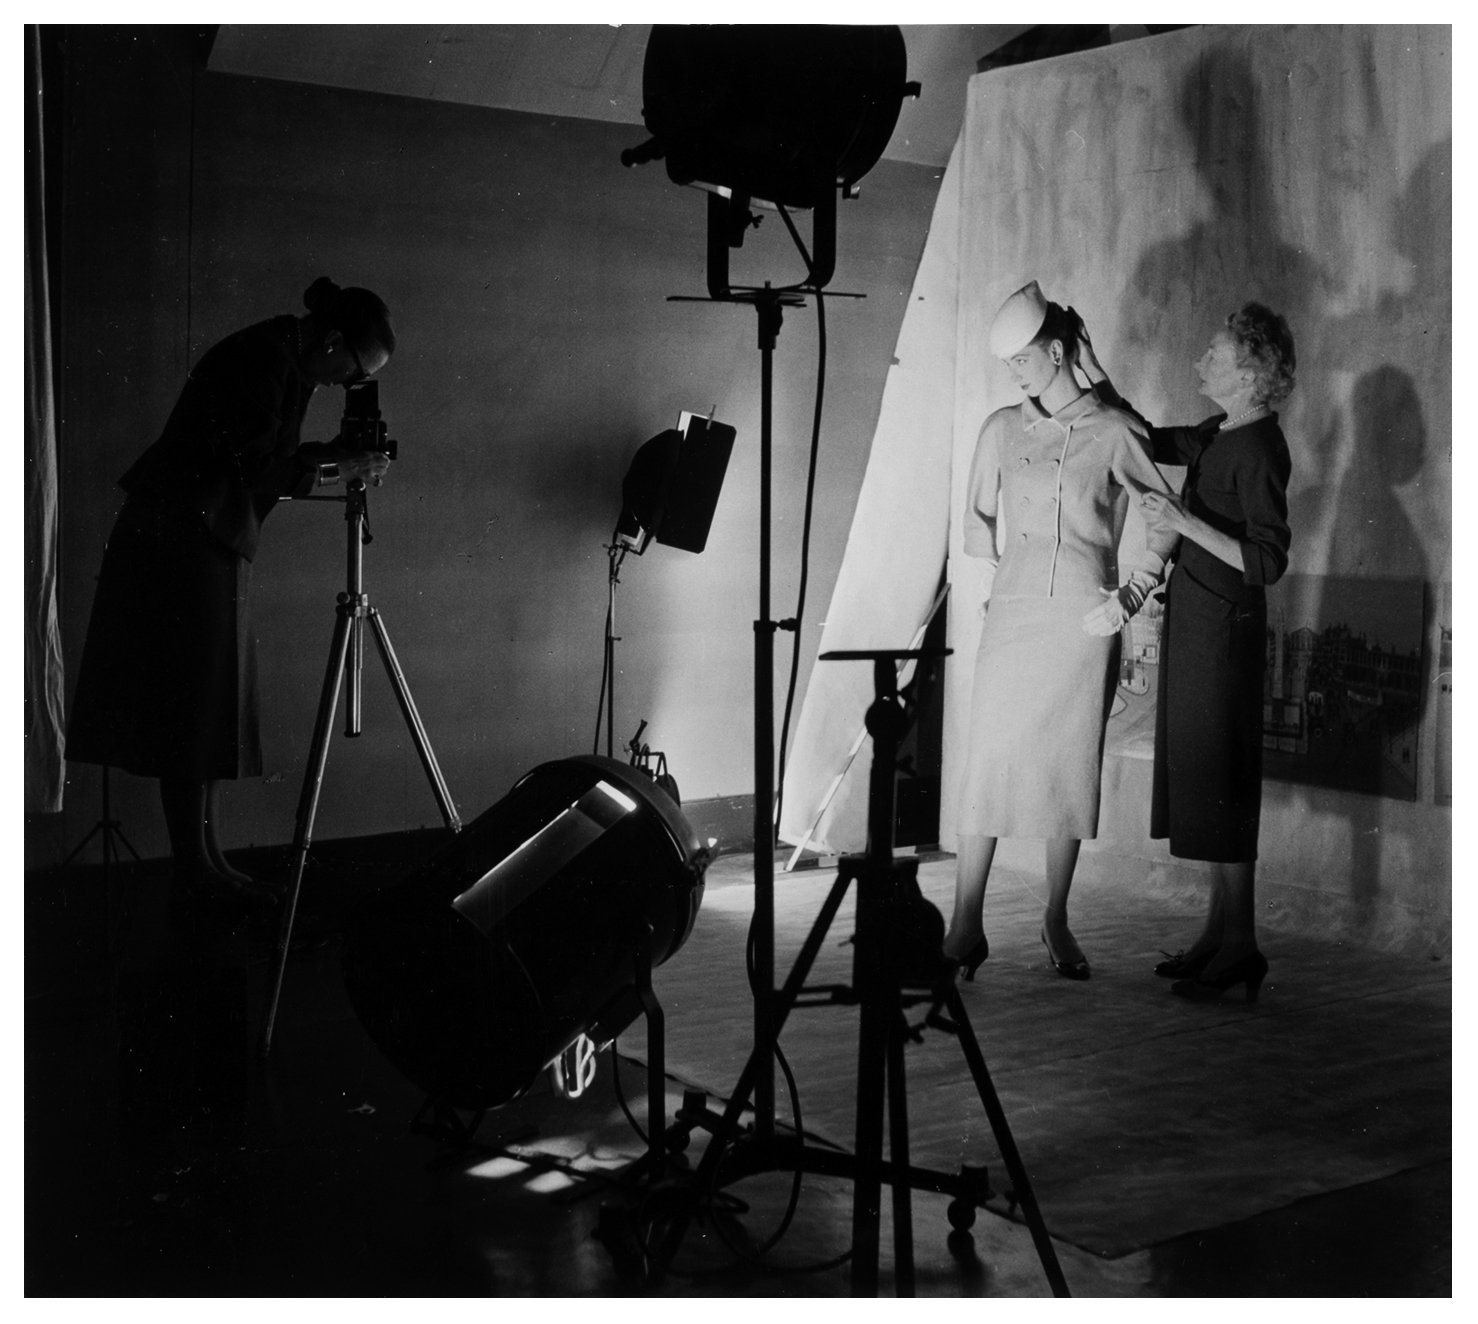 robert-doisneau-working-on-fashion-shoot-with-photographer-louise-dahl-wolfe-and-model-suzy-parker-1953-copy.jpg